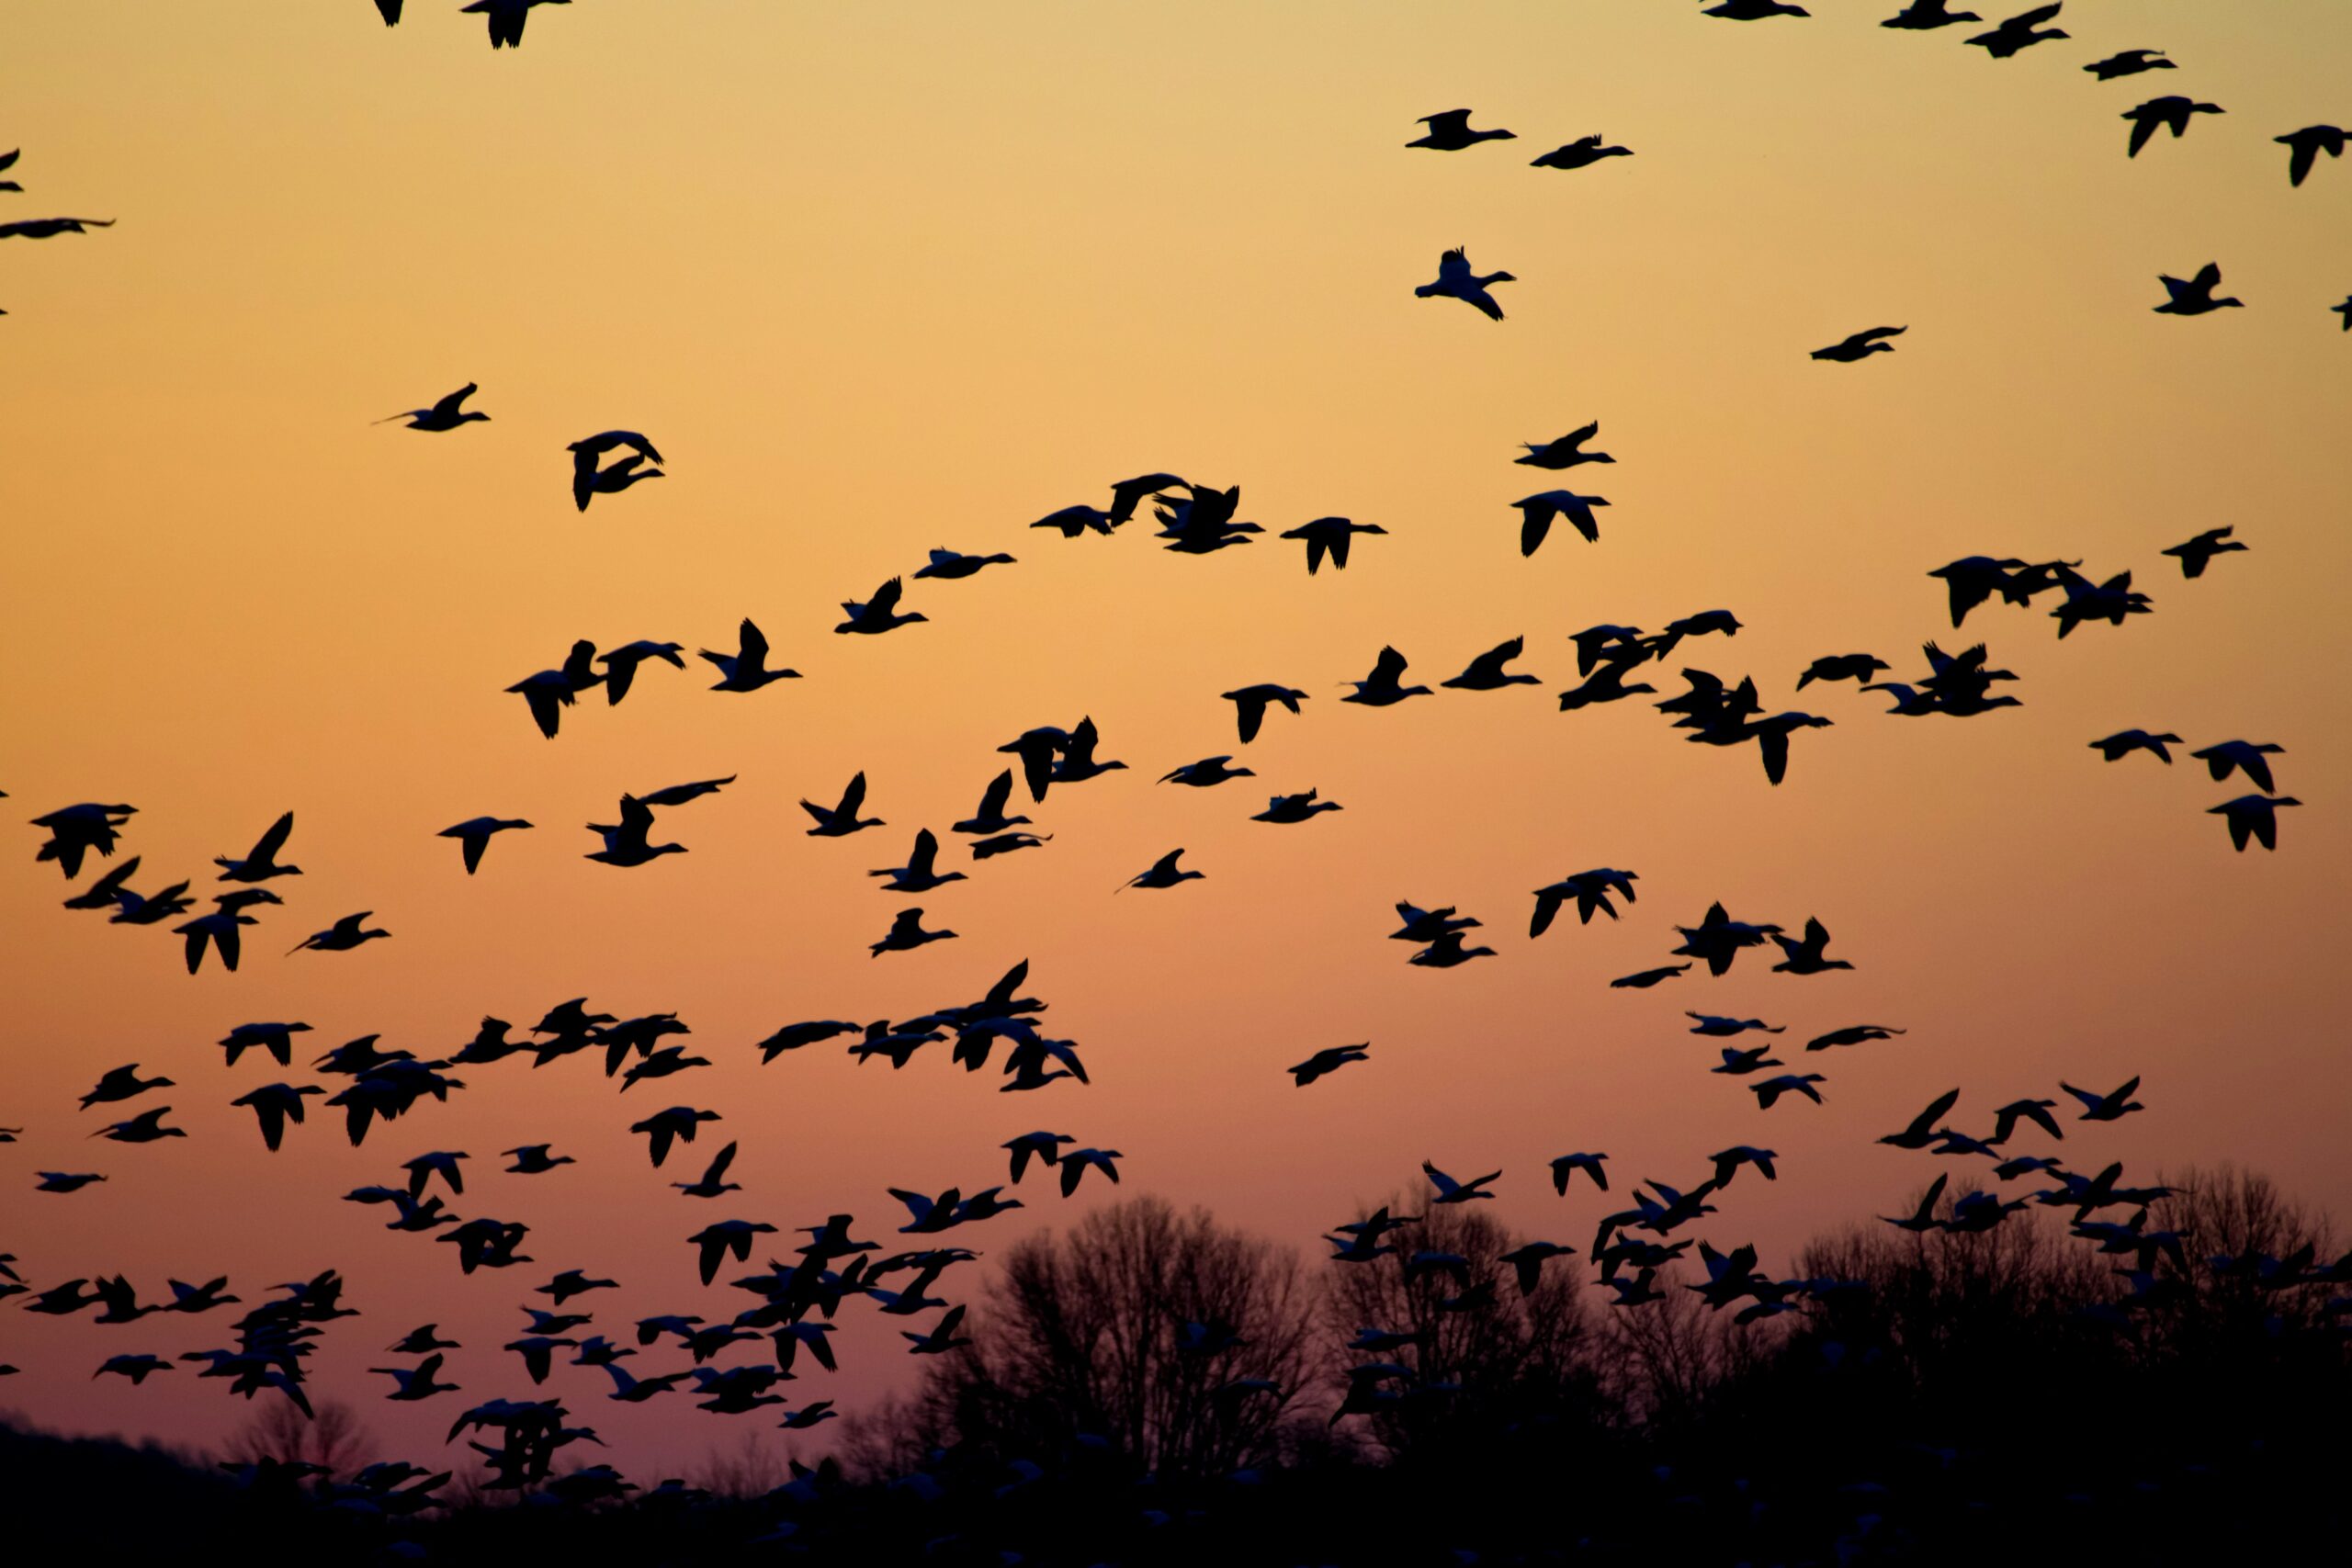 waterfowl migrating in a big flock with a colorful sunset background